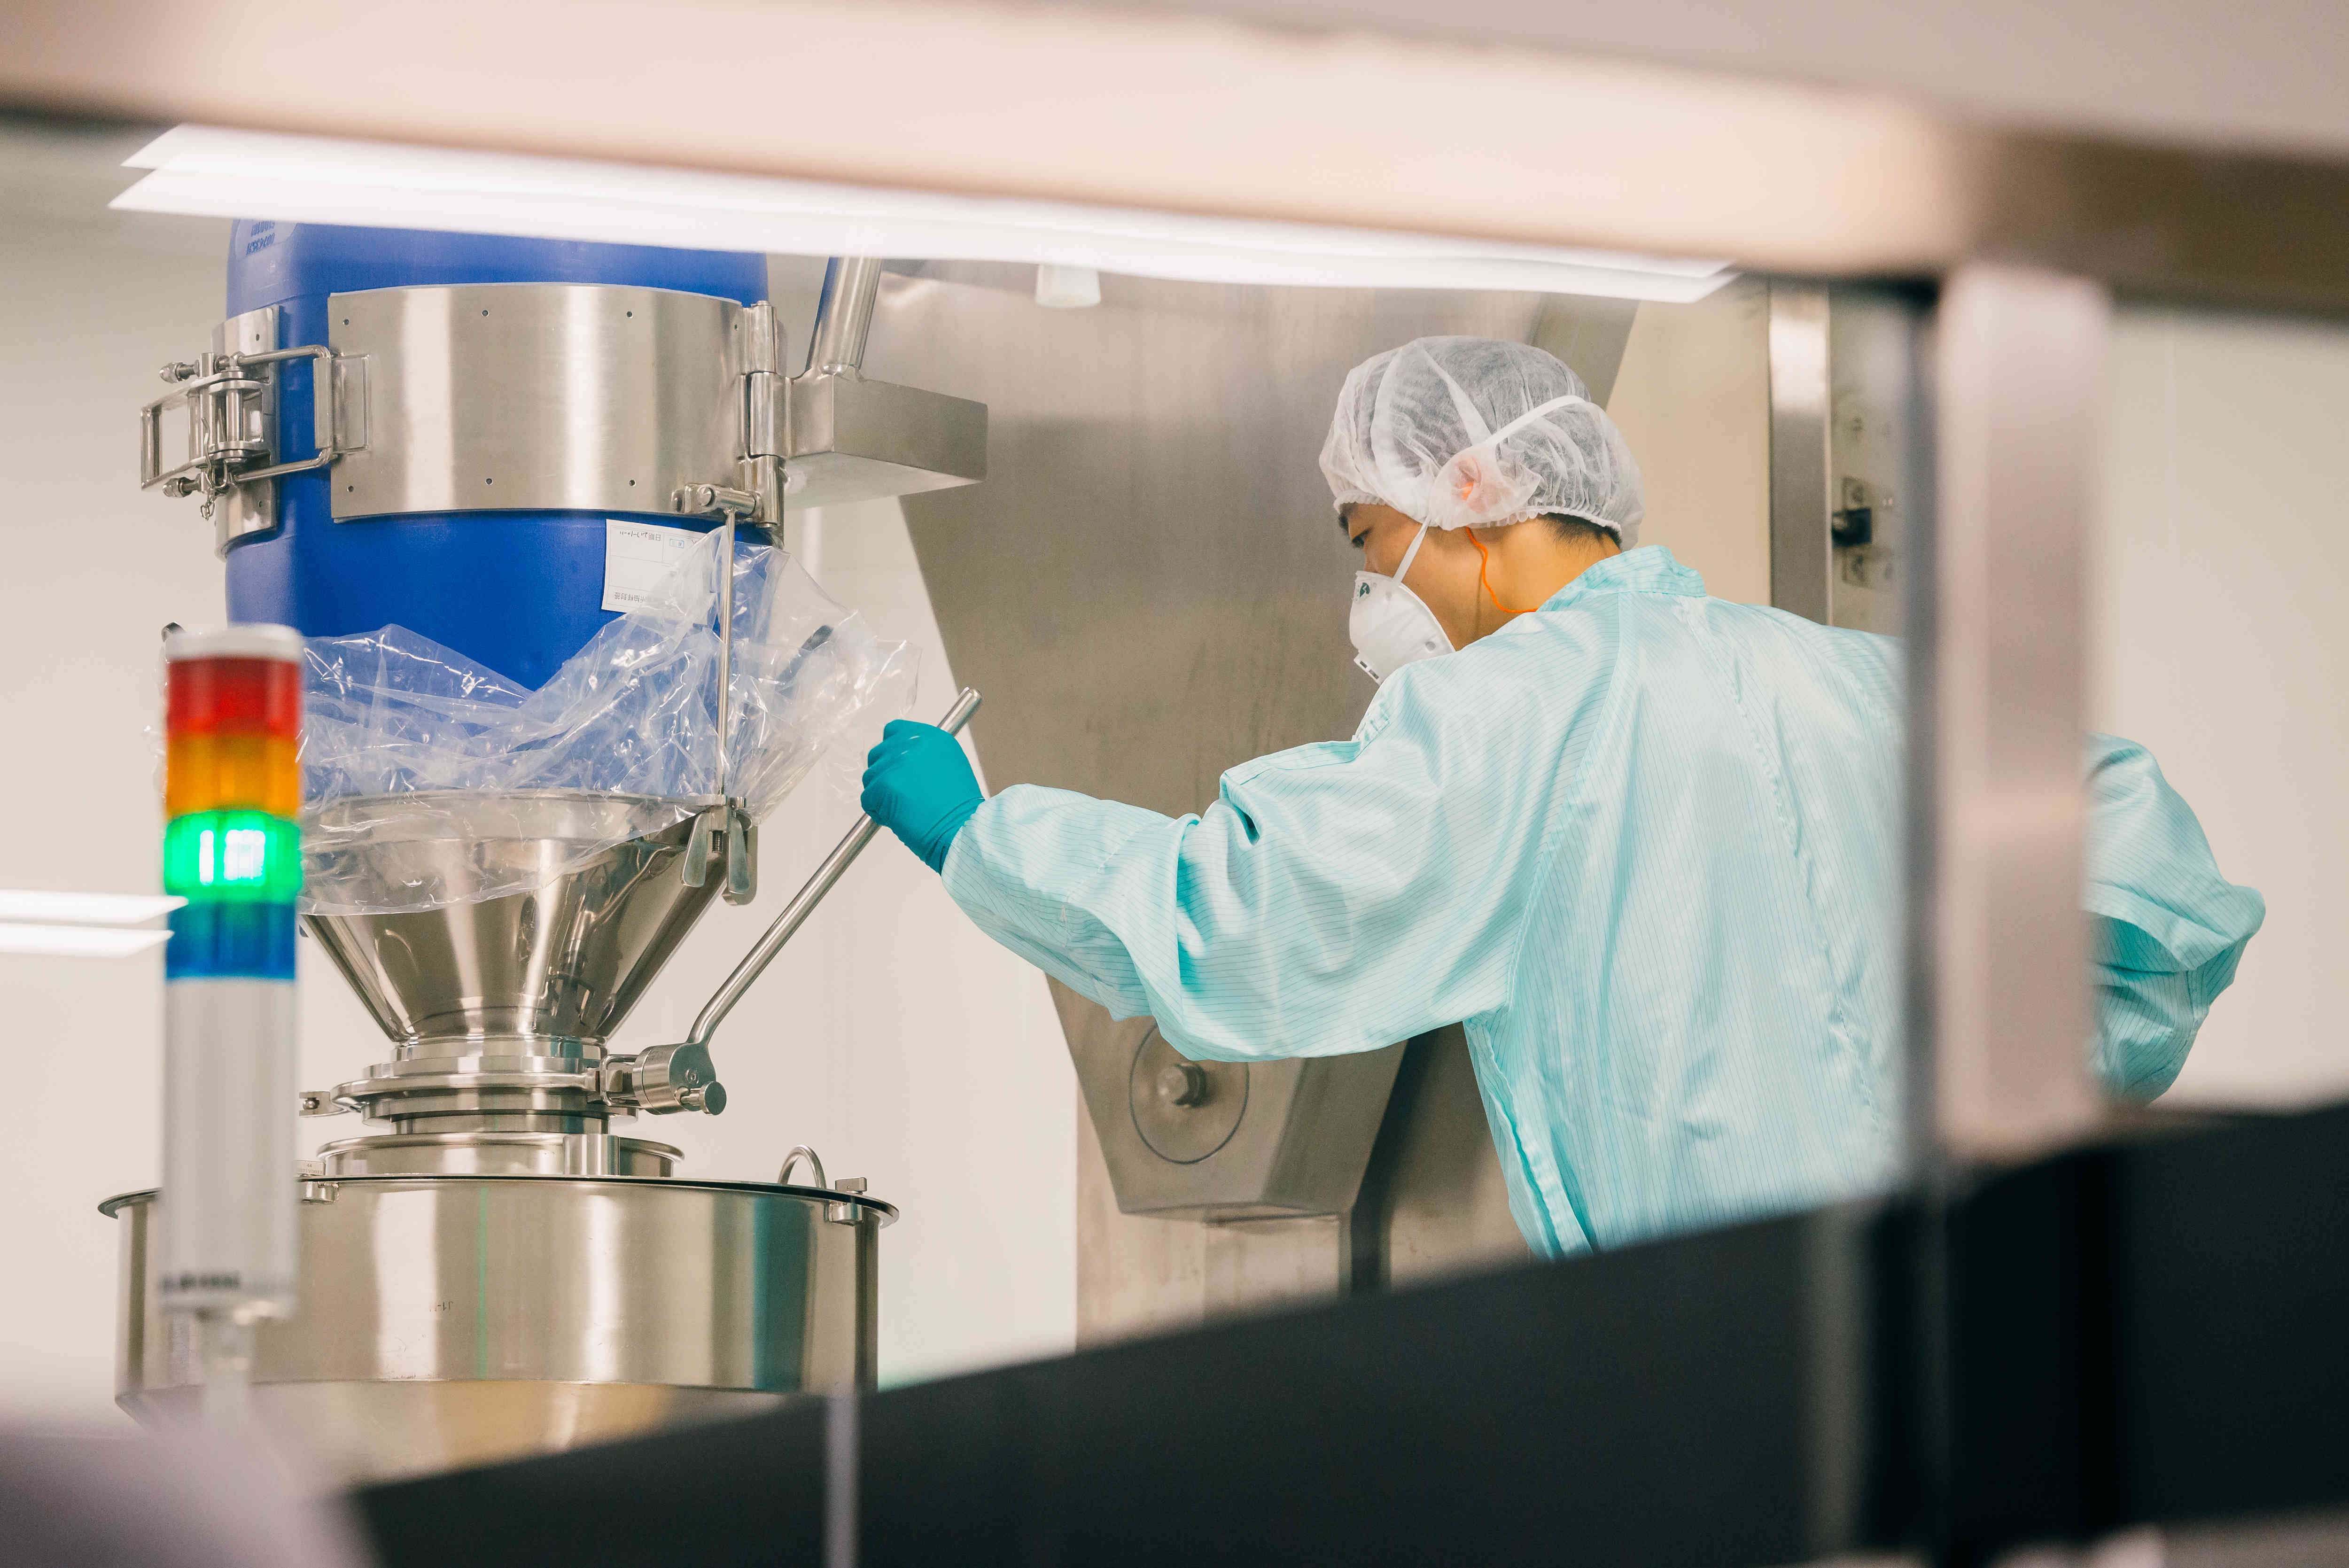 The image depicts a scientist in protective gear, who is transferring materials from a plastic bag into a stainless steel funnel connected to a metallic machine in a sterile environment, possibly for pharmaceutical or food processing purposes.